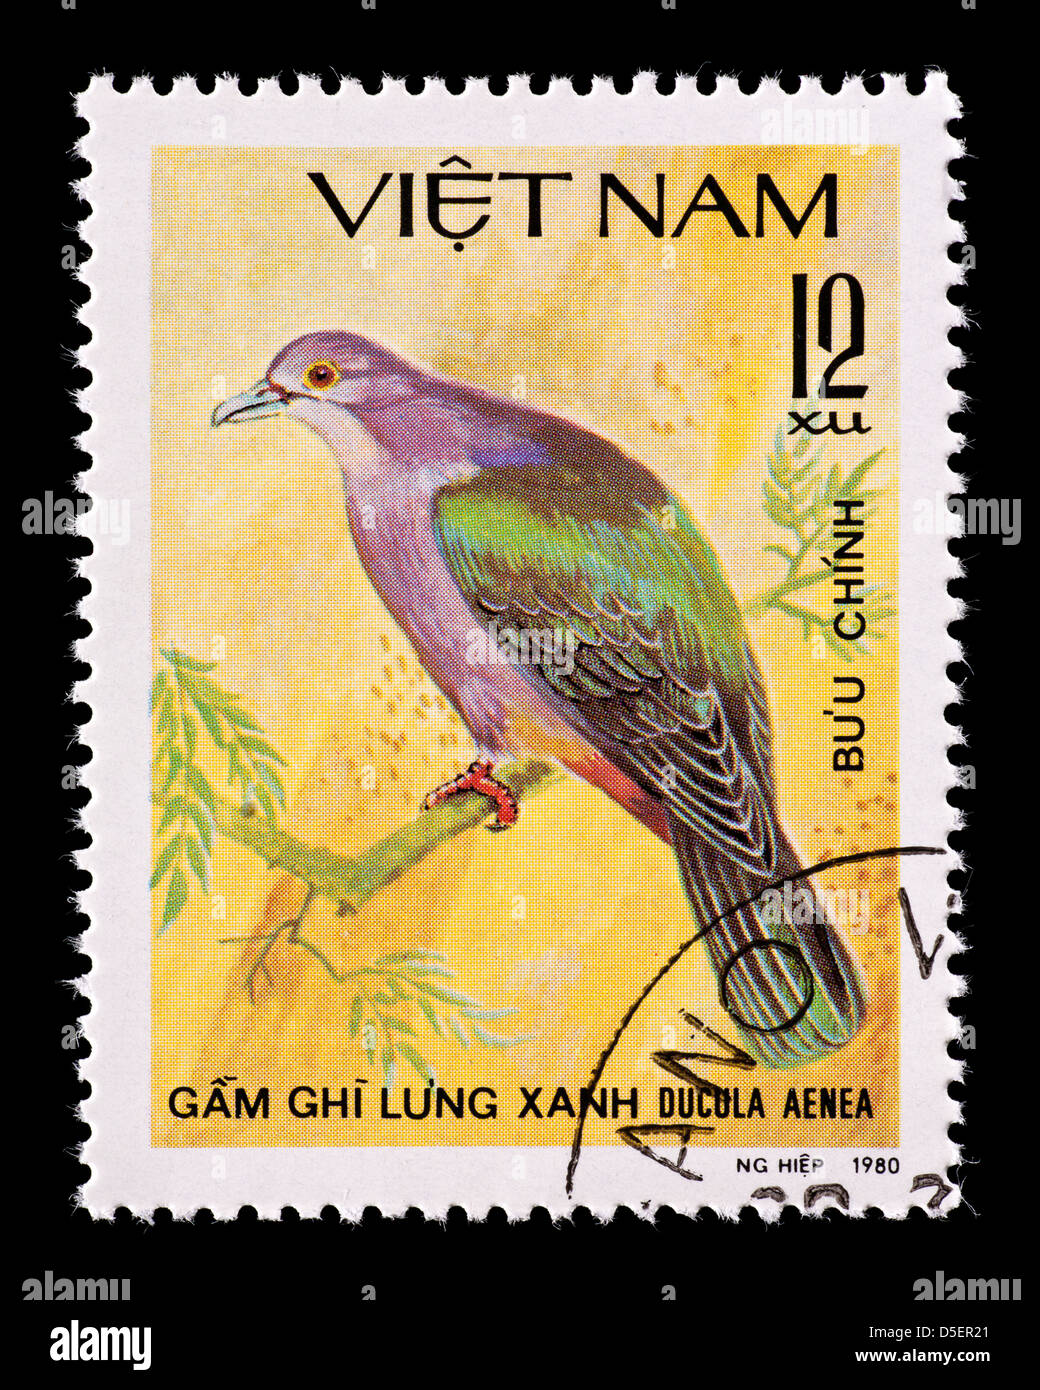 Postage stamp from Vietnam depicting a Green Imperial Pigeon (Ducula aenea) Stock Photo